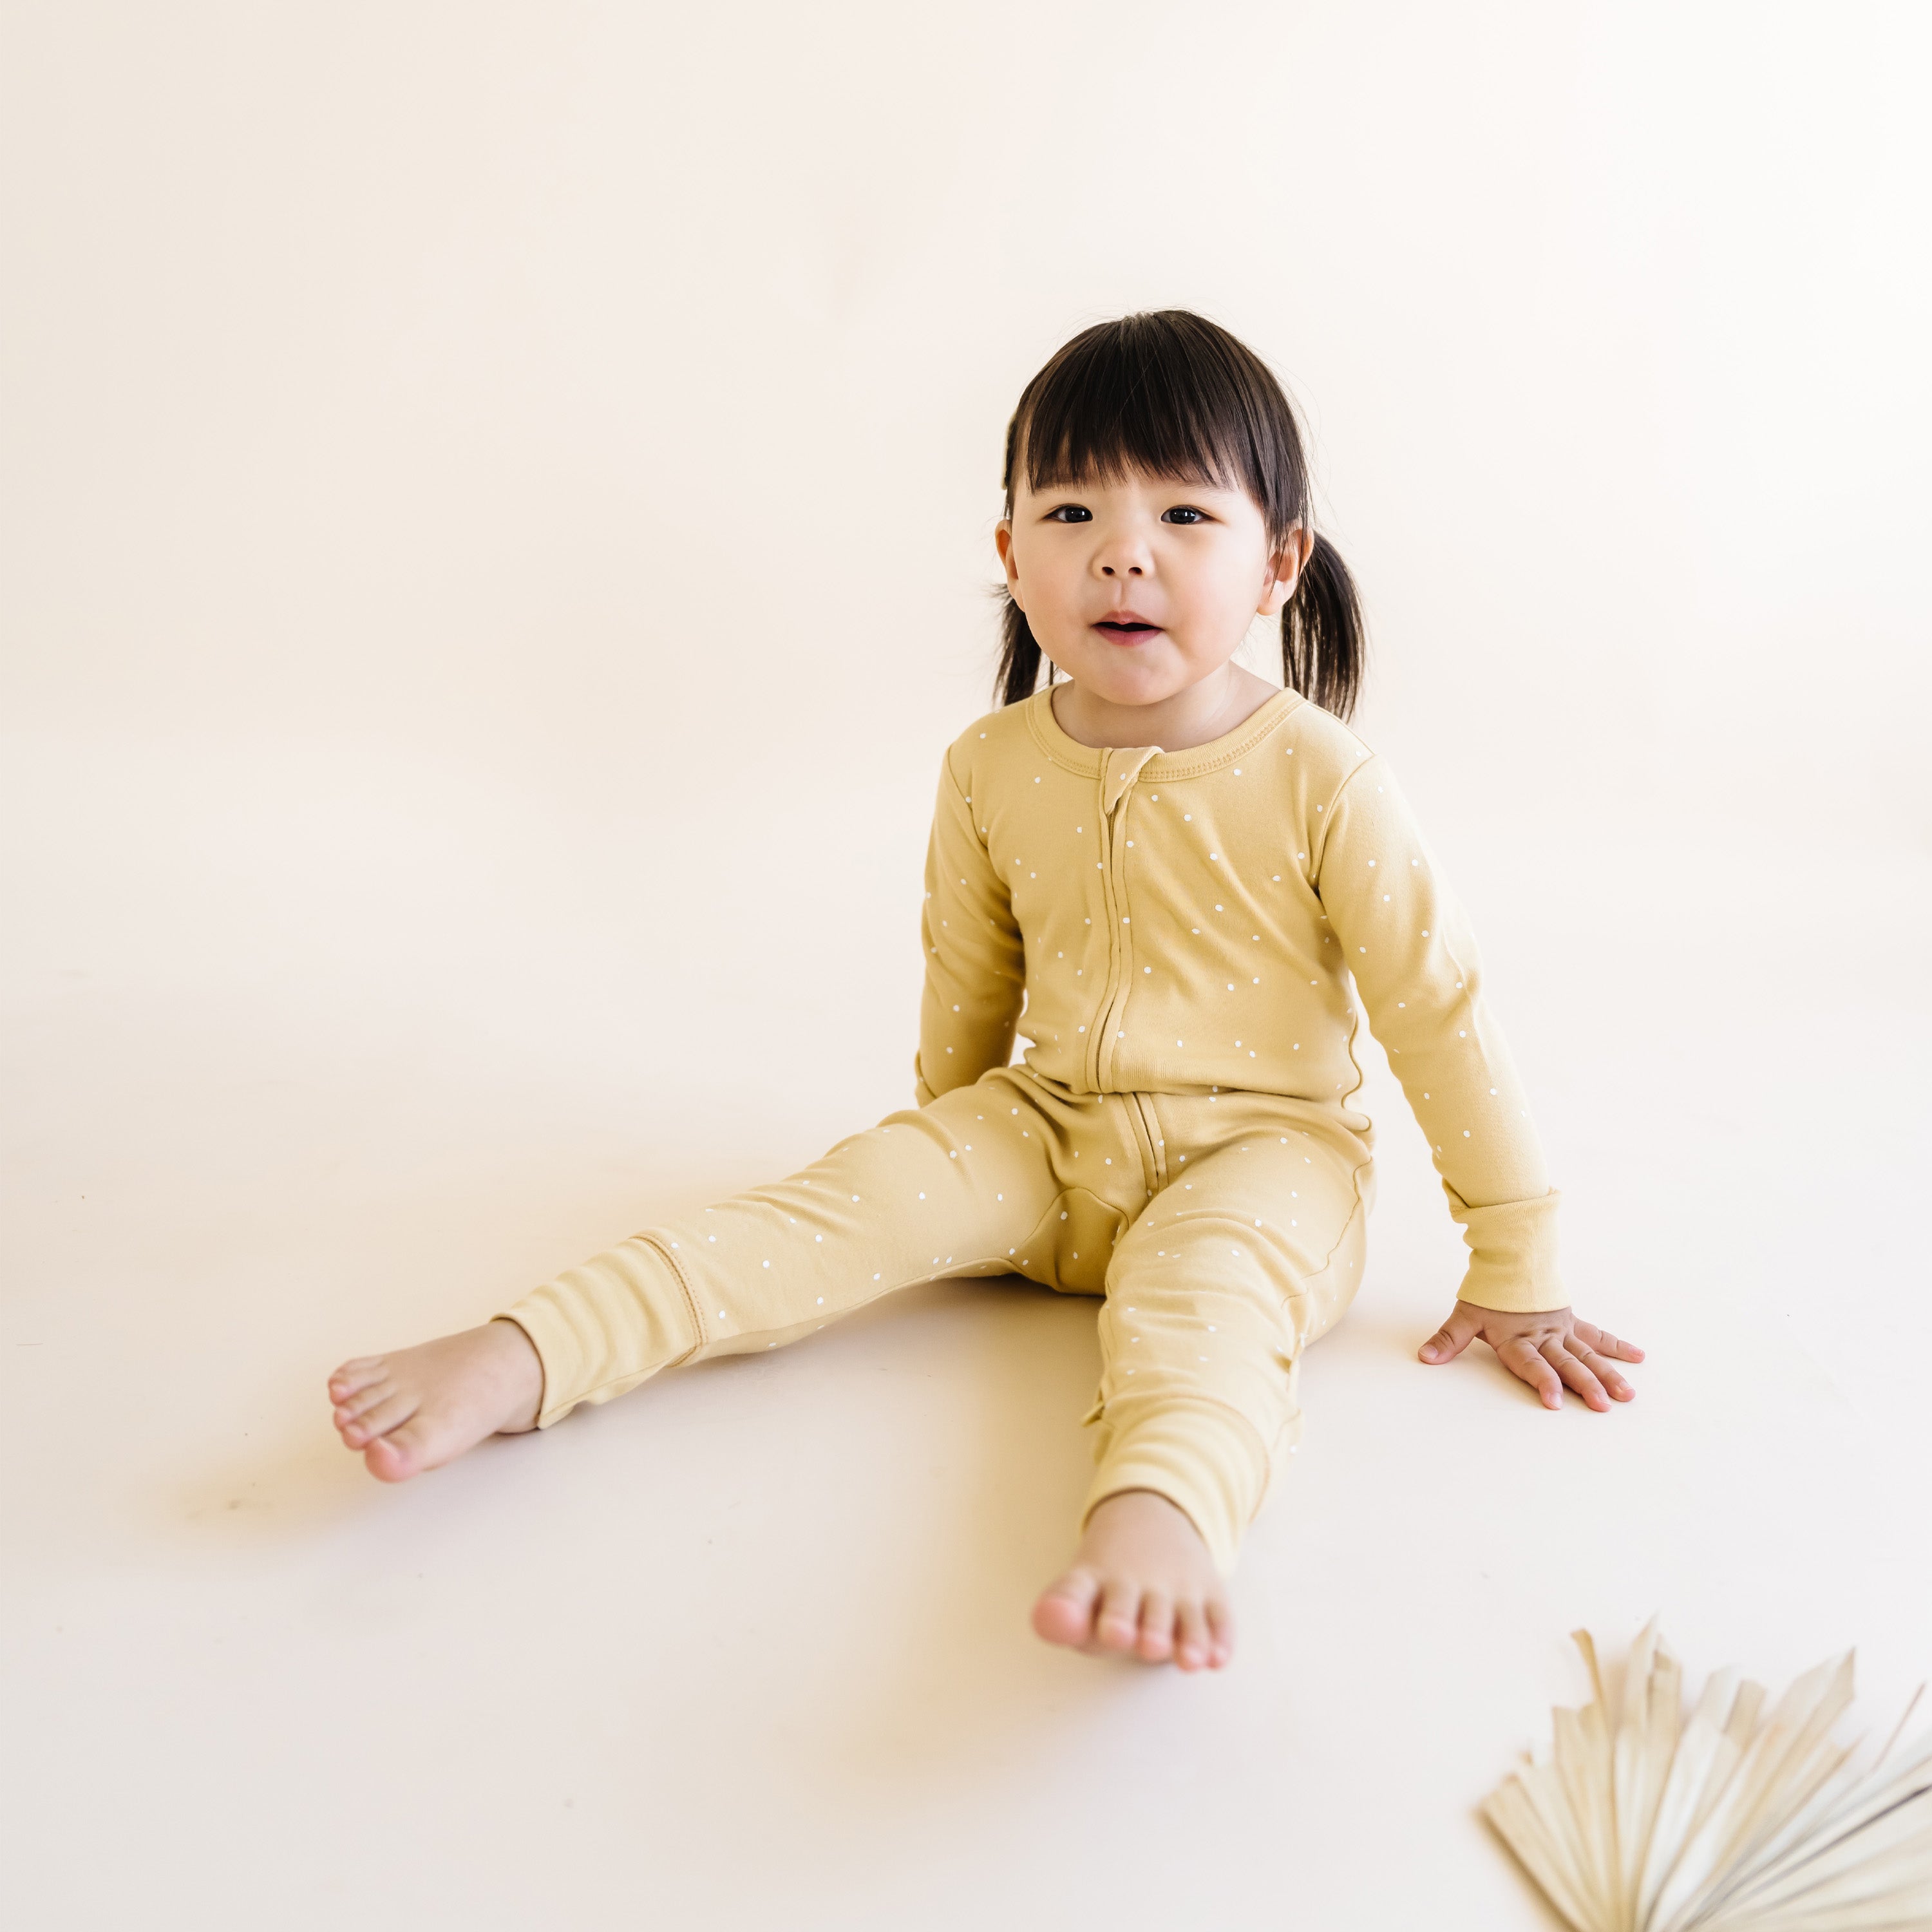 A toddler with short black hair, wearing an Organic Baby Organic 2-Way Zip Romper - Yellowstone with a polka dot pattern, sits on a pale background, looking at the camera with a neutral expression.